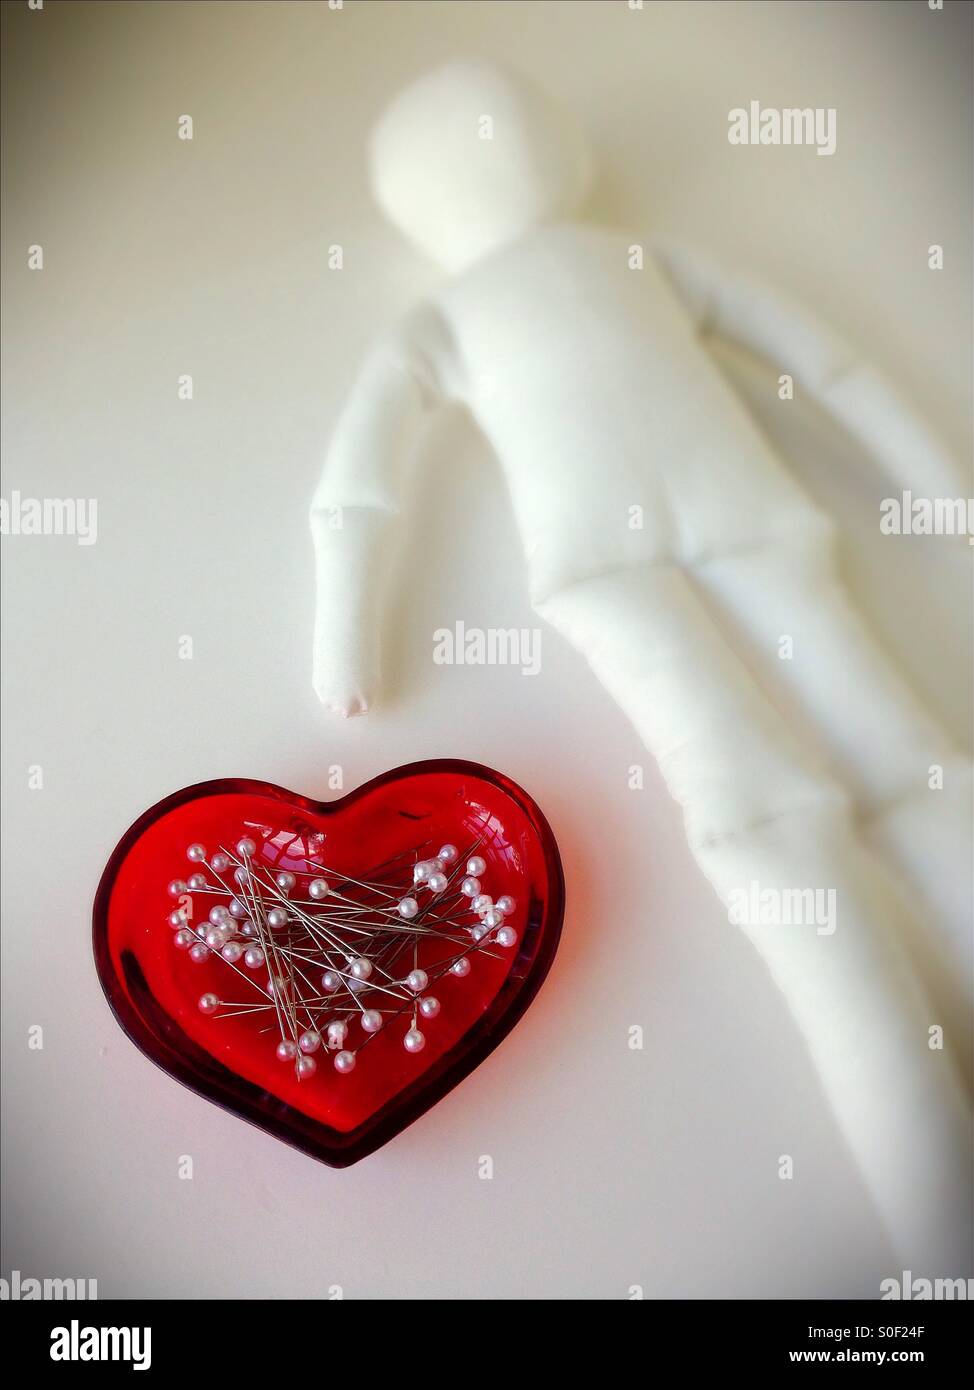 Pins in a heart shaped dish next to a blank voodoo doll. Stock Photo